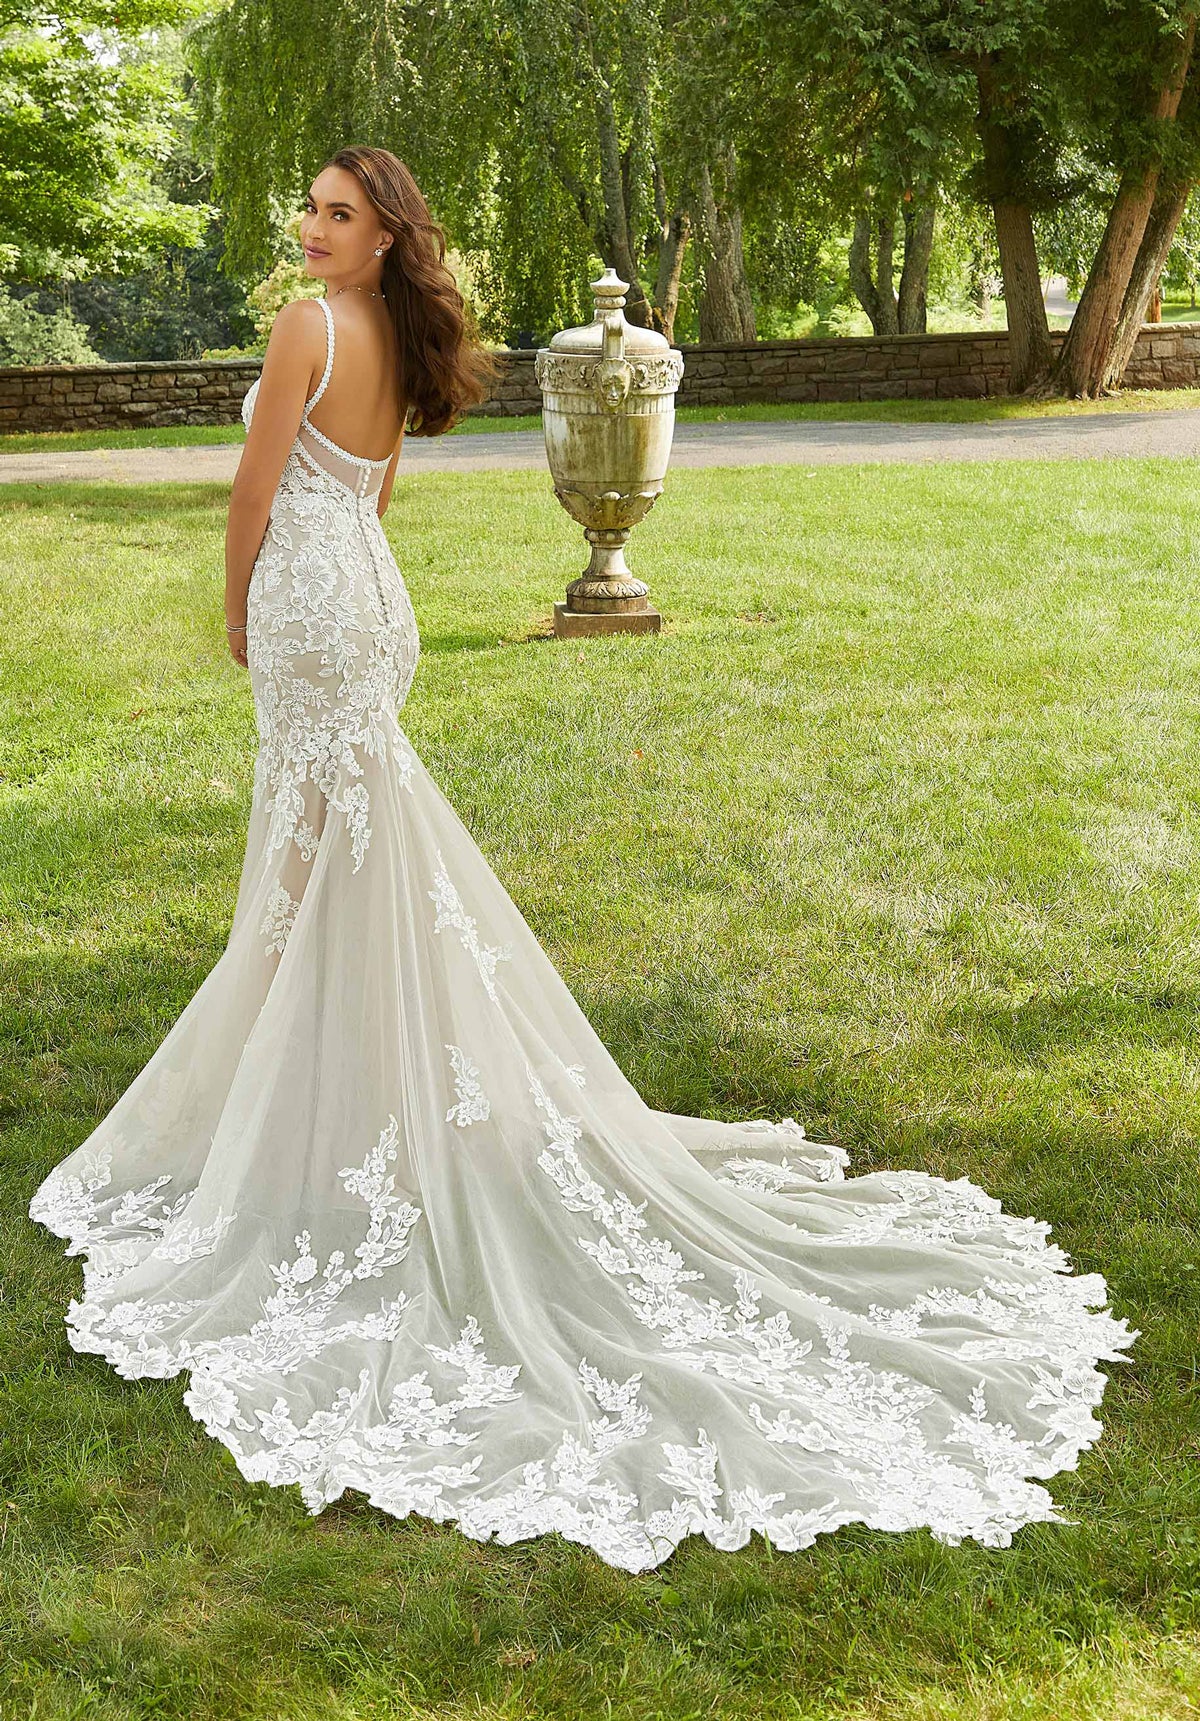 Asymmetrically Draped Net Morilee Bridal Wedding Dress | 2 Have and 2 Hold